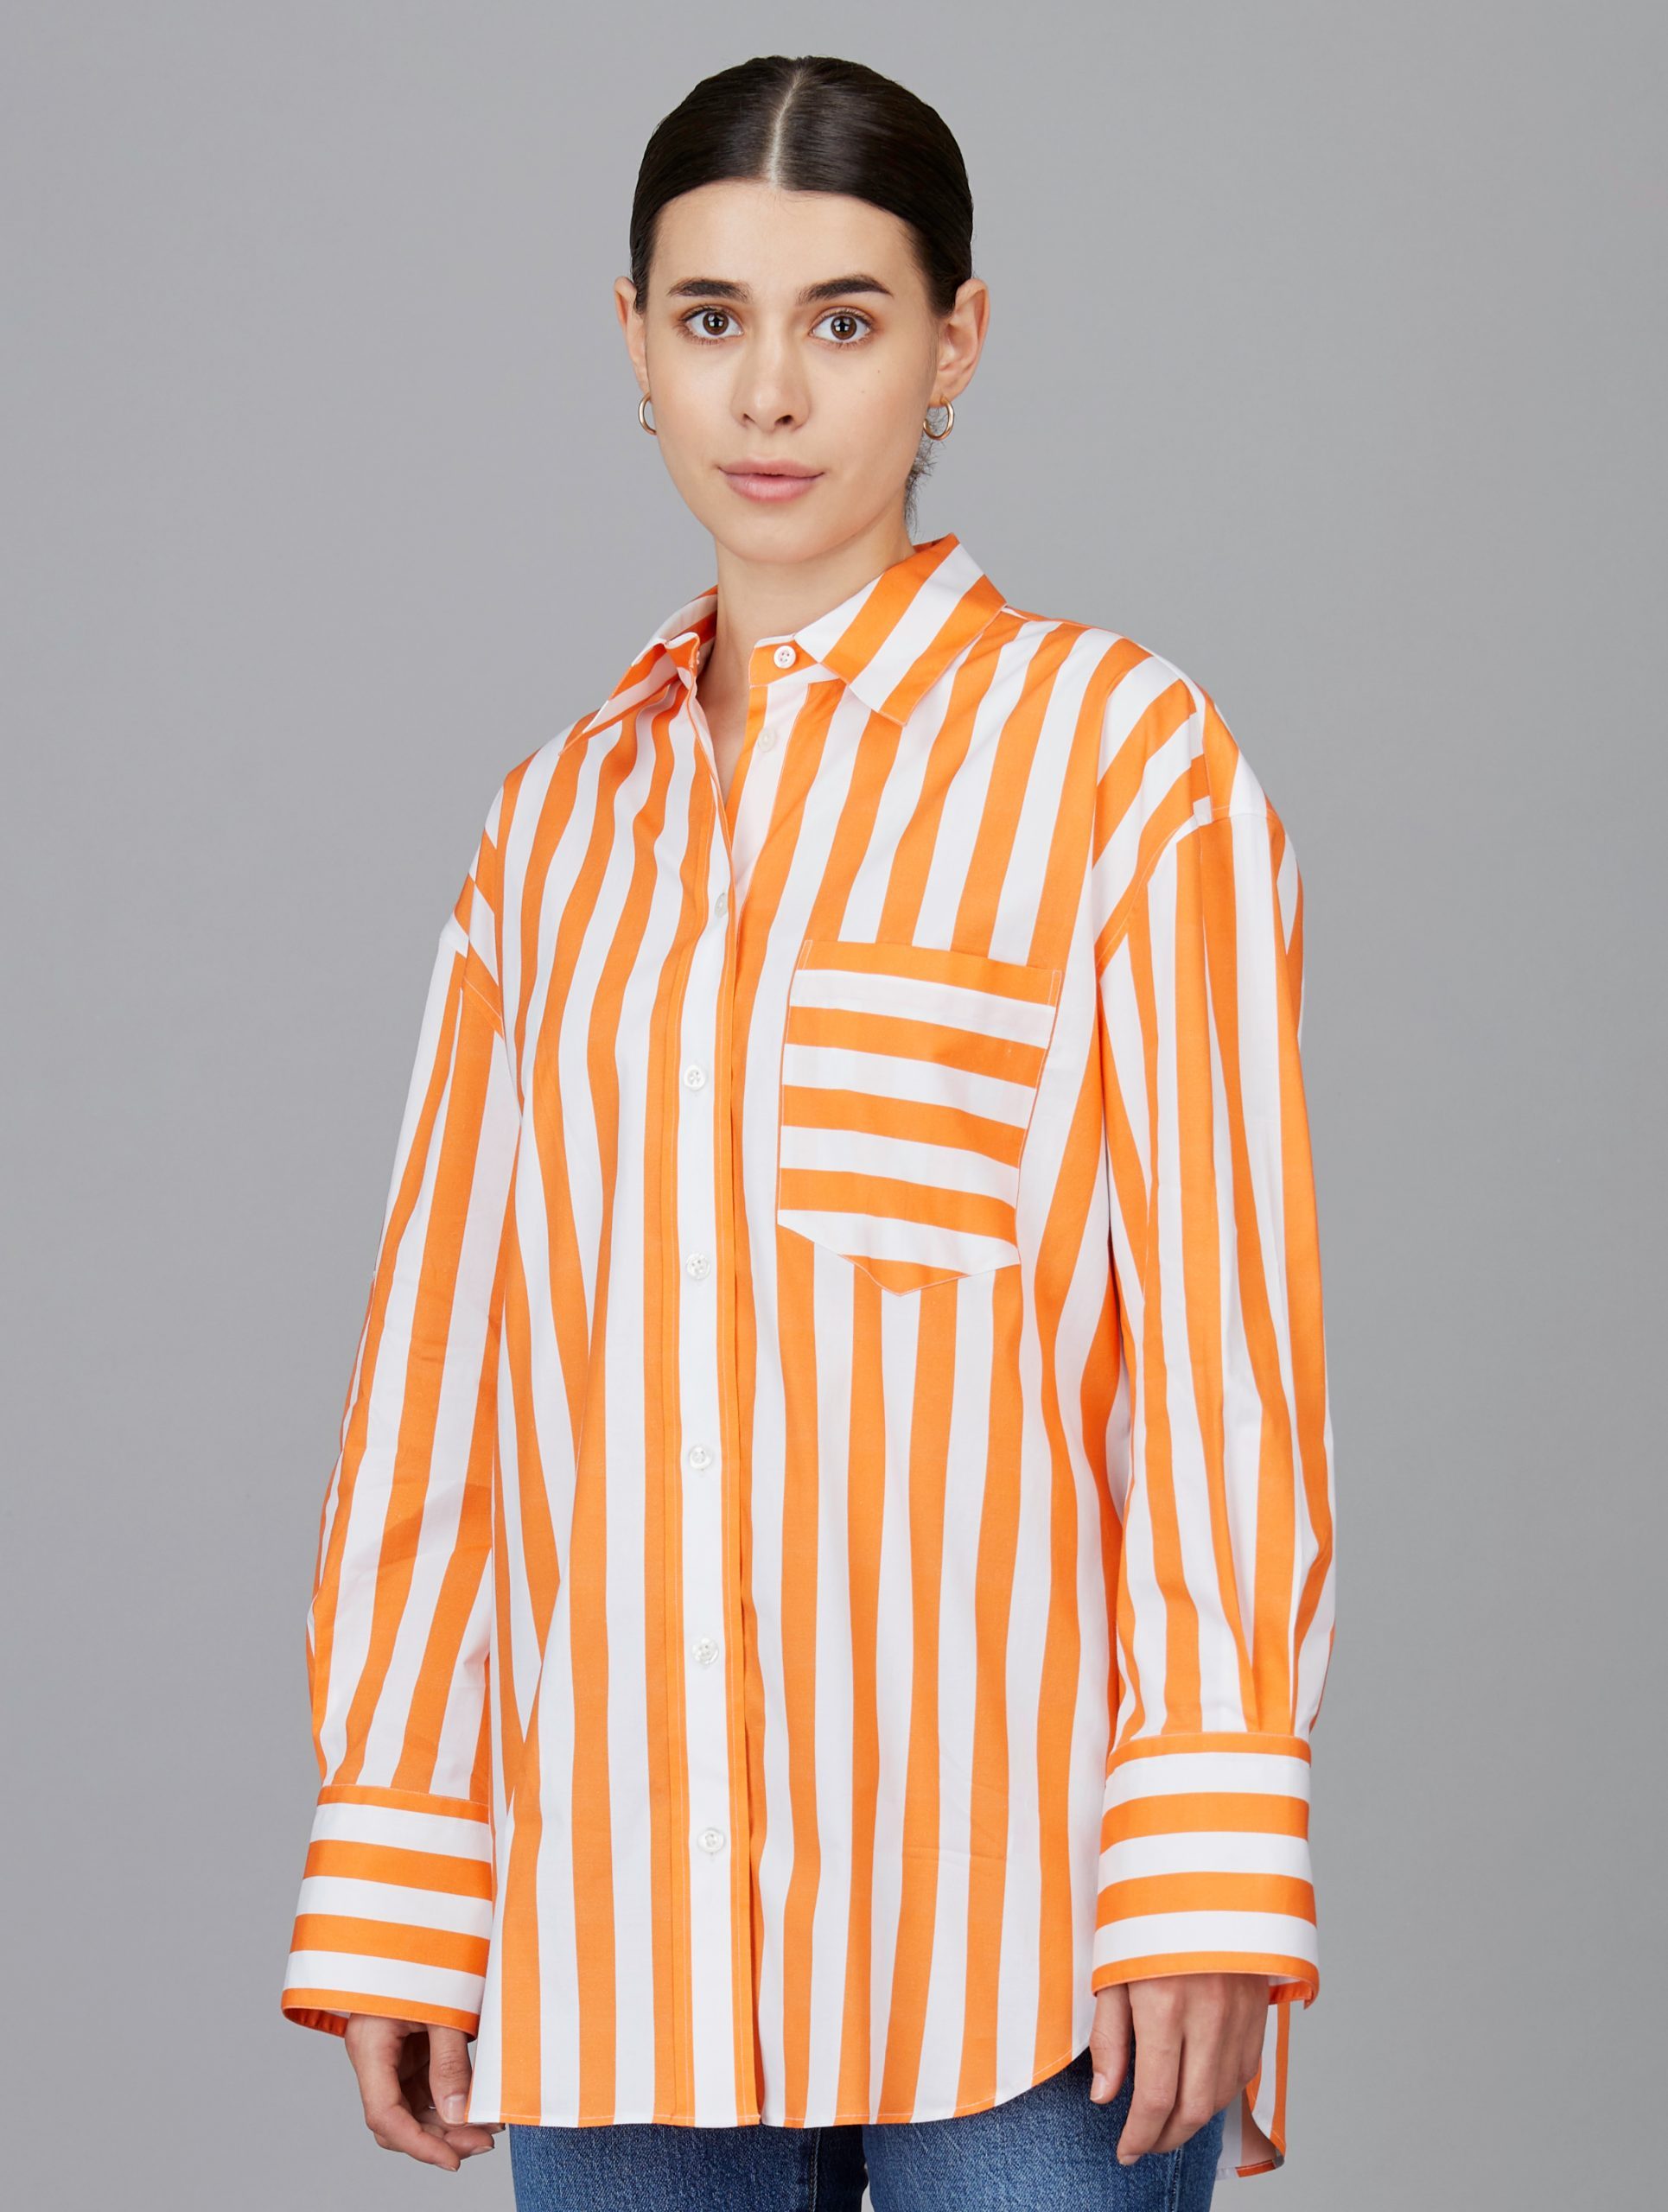 Awning stripe boyfriend shirt in Orange colour - Camessi Collection